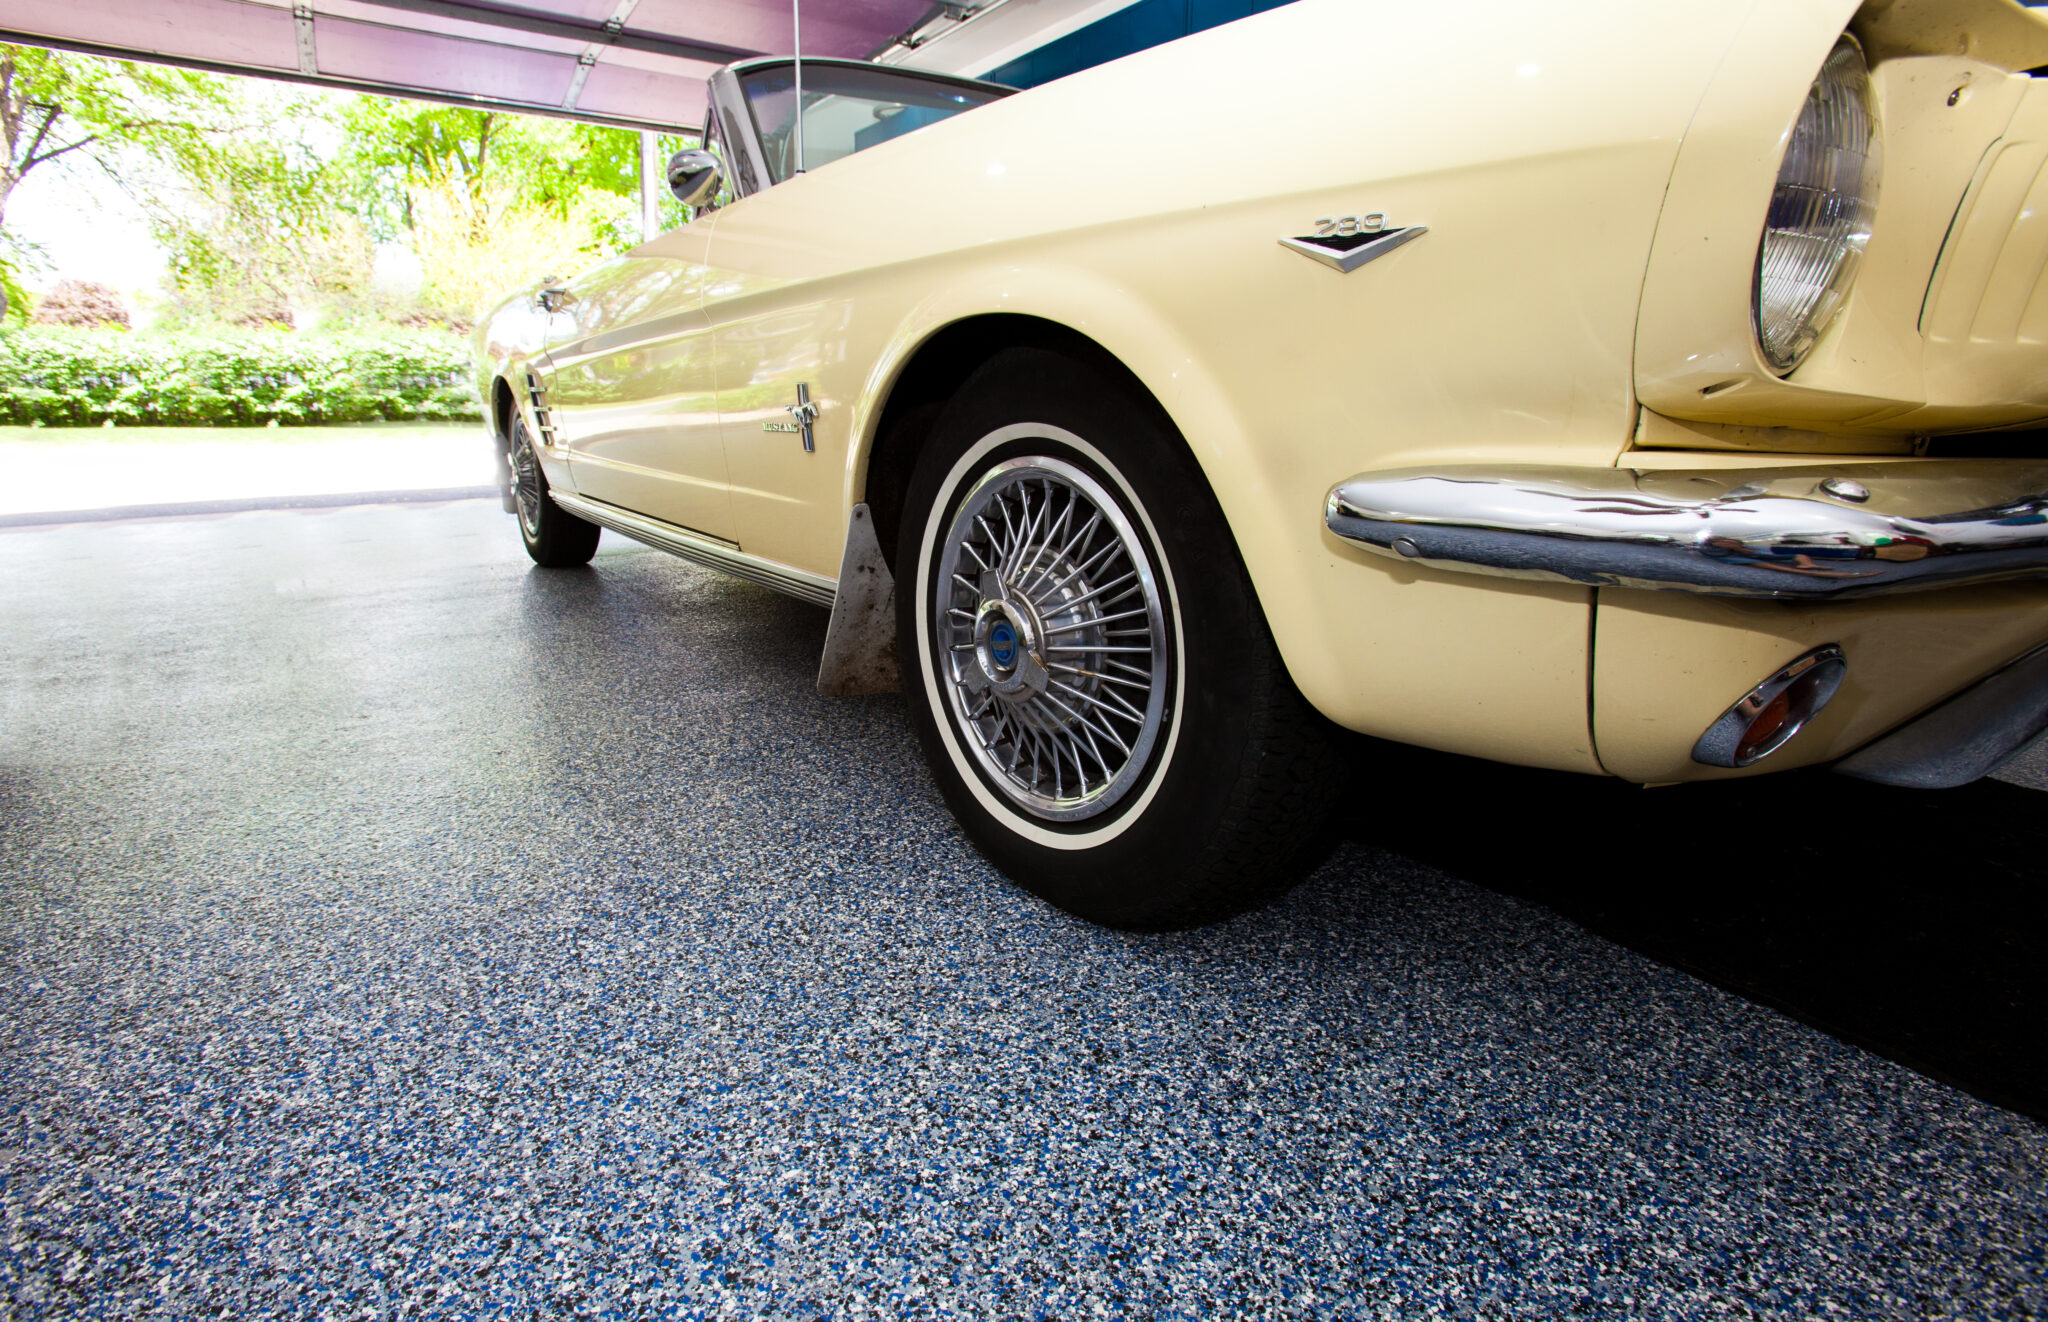 Our Penntek Industrial Coatings are the perfect flooring option for your home! Use it on your garage floors, back patio, pool deck, driveway or laundry room. Our Polyurea 3-layer system is the toughest around; perfect for whatever you can throw at it!